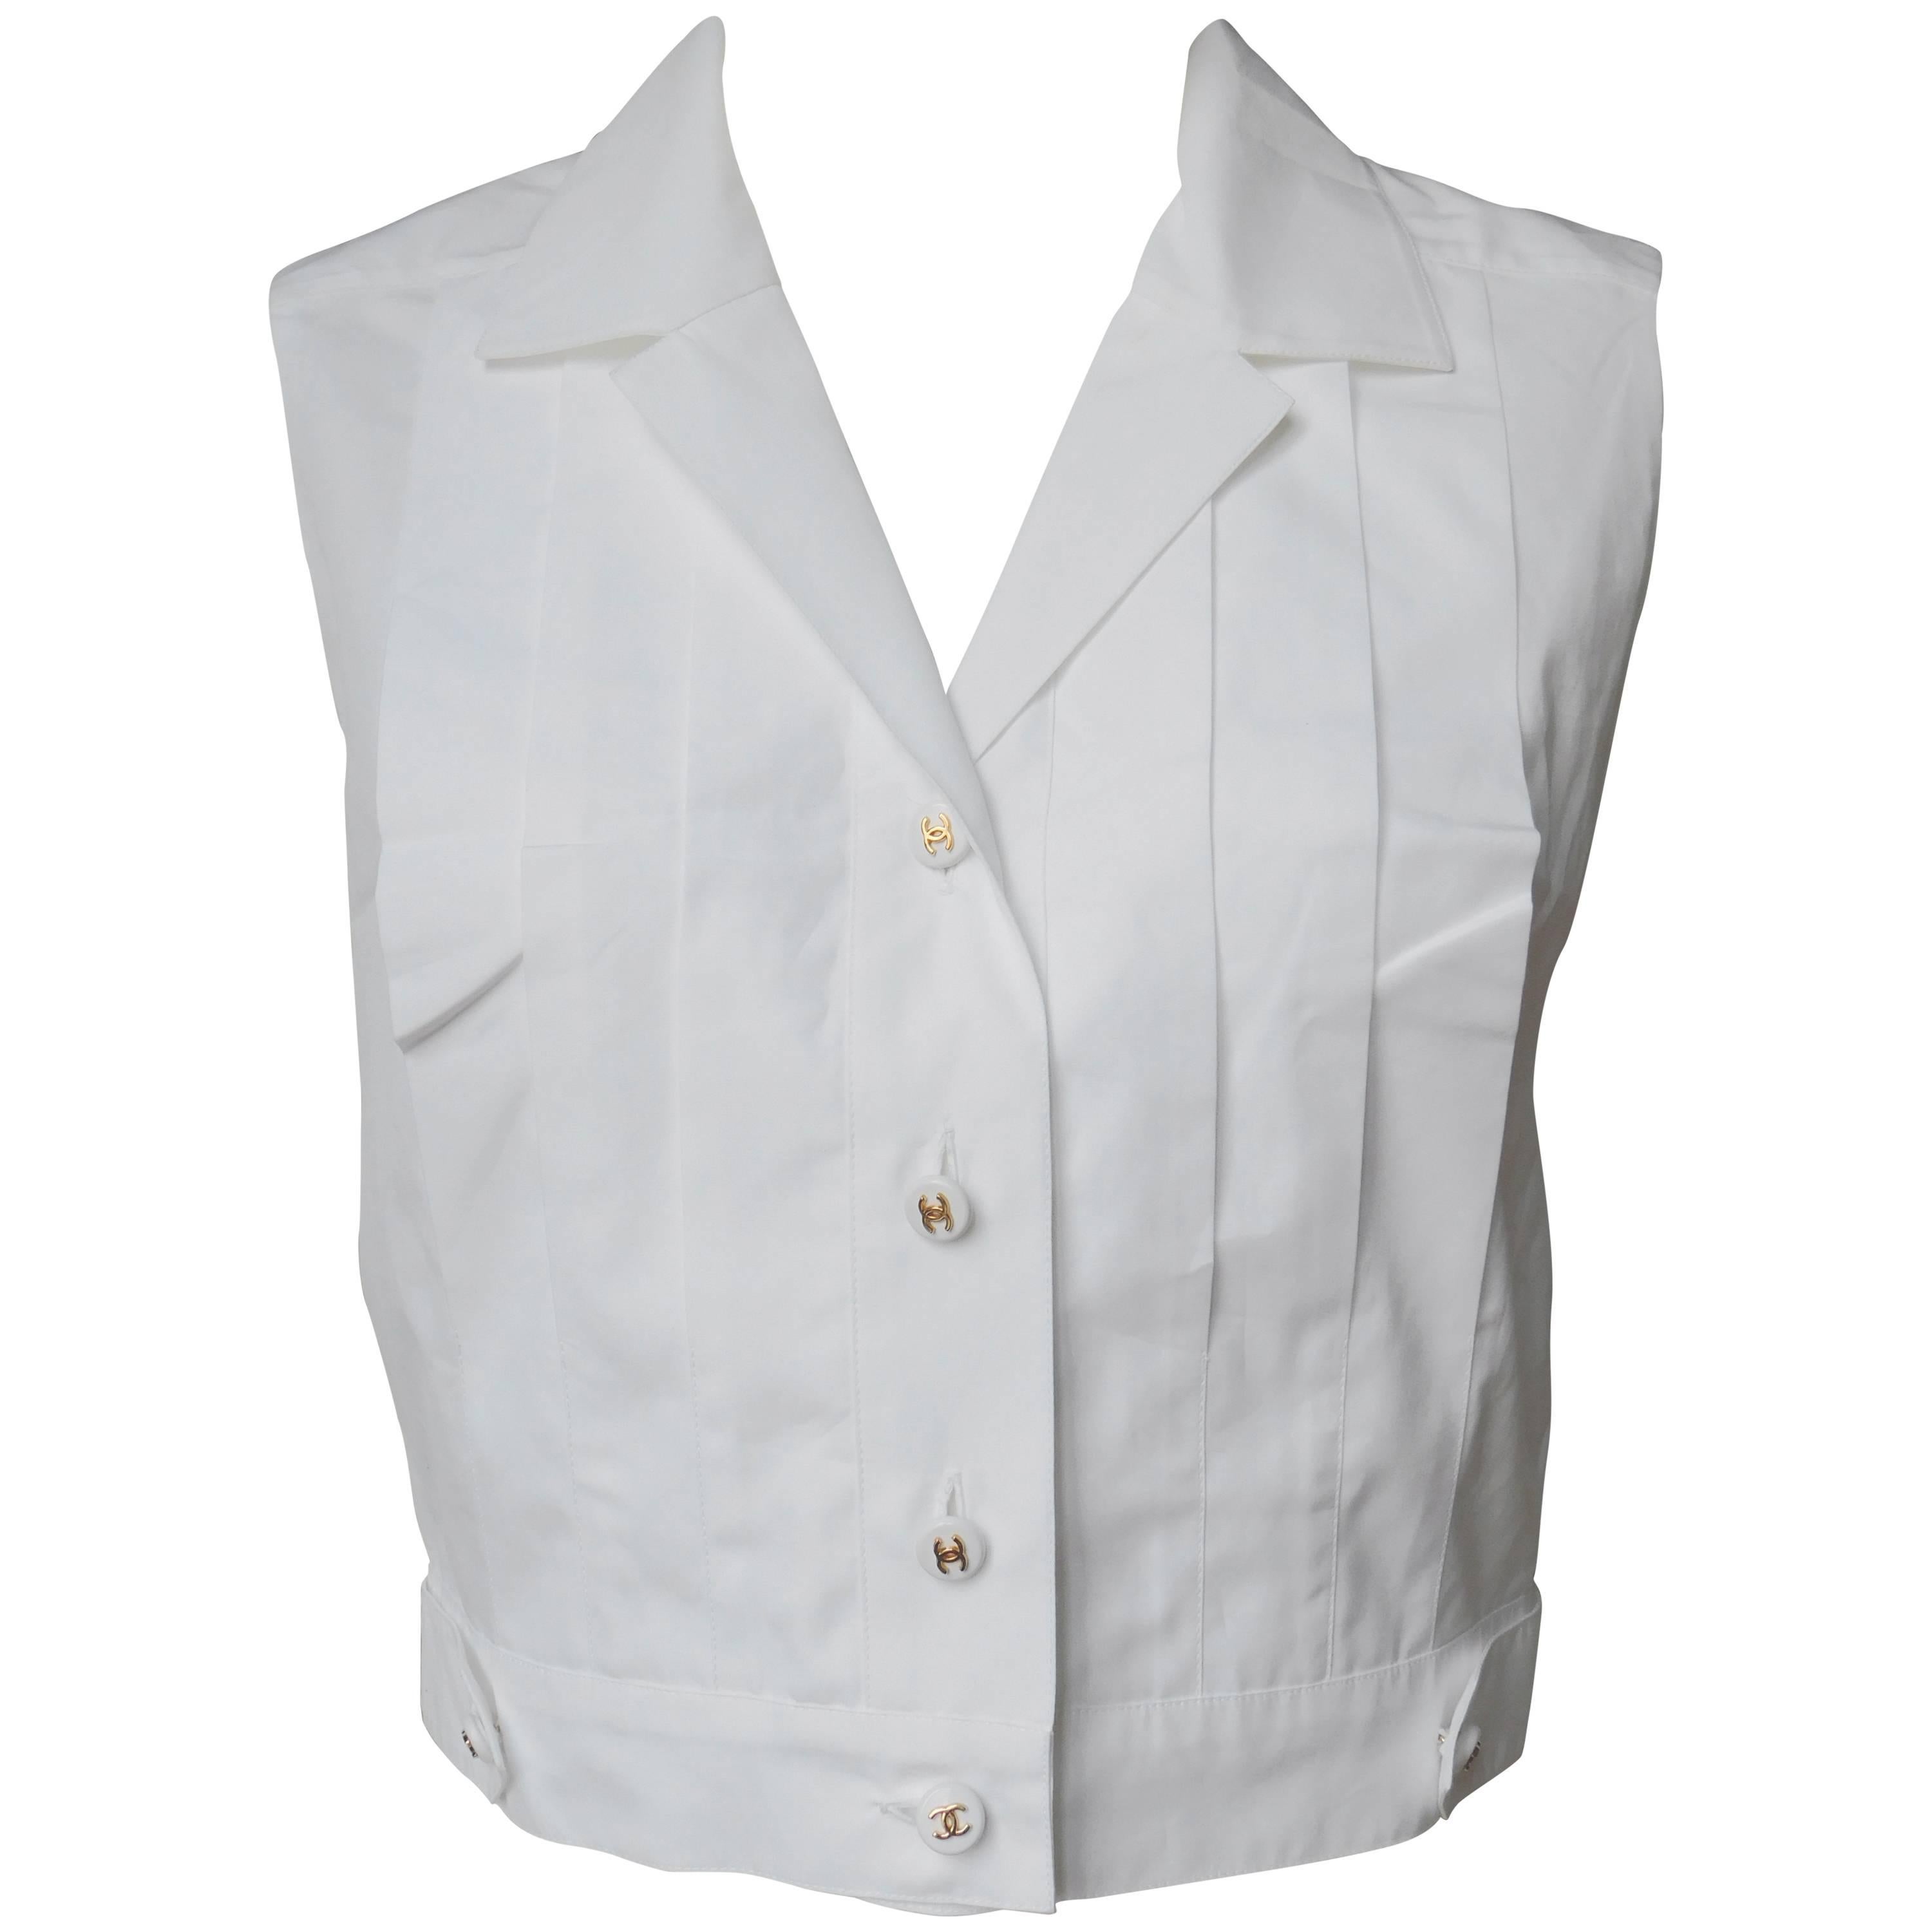 Chanel boutique White Pleated Cotton Sleeveless Button Front Shirt 